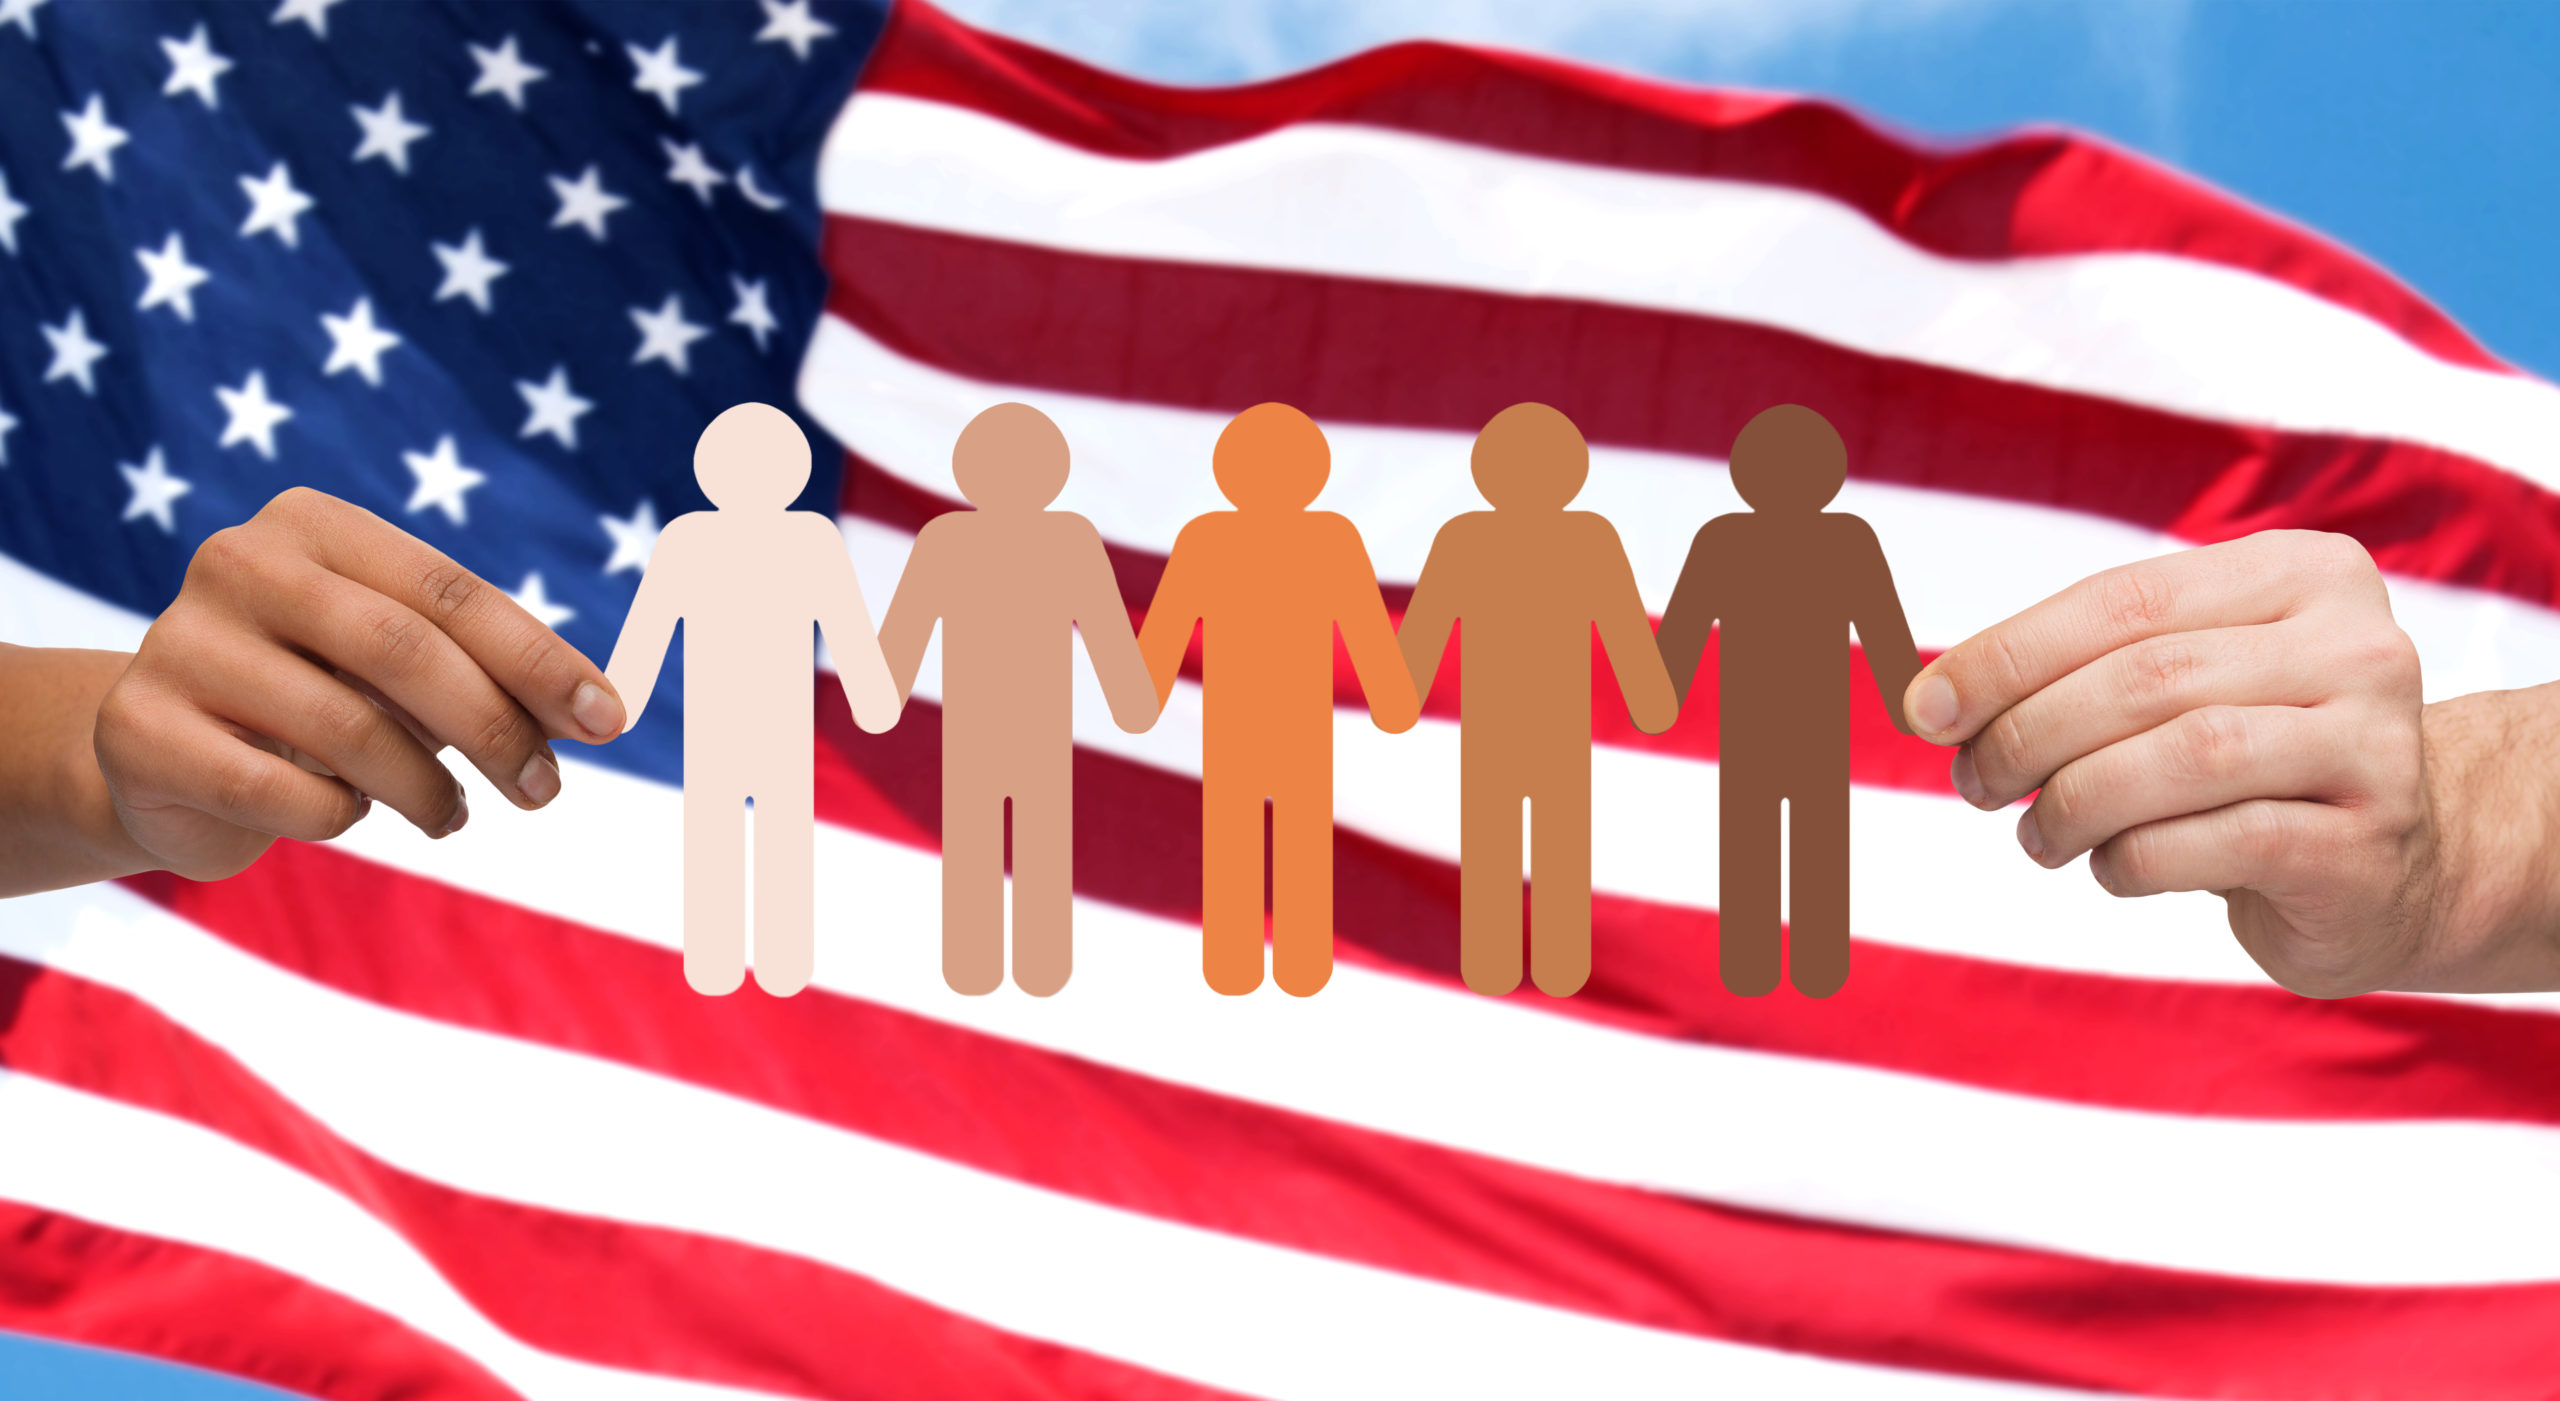 Hands With People Pictogram Over American Flag